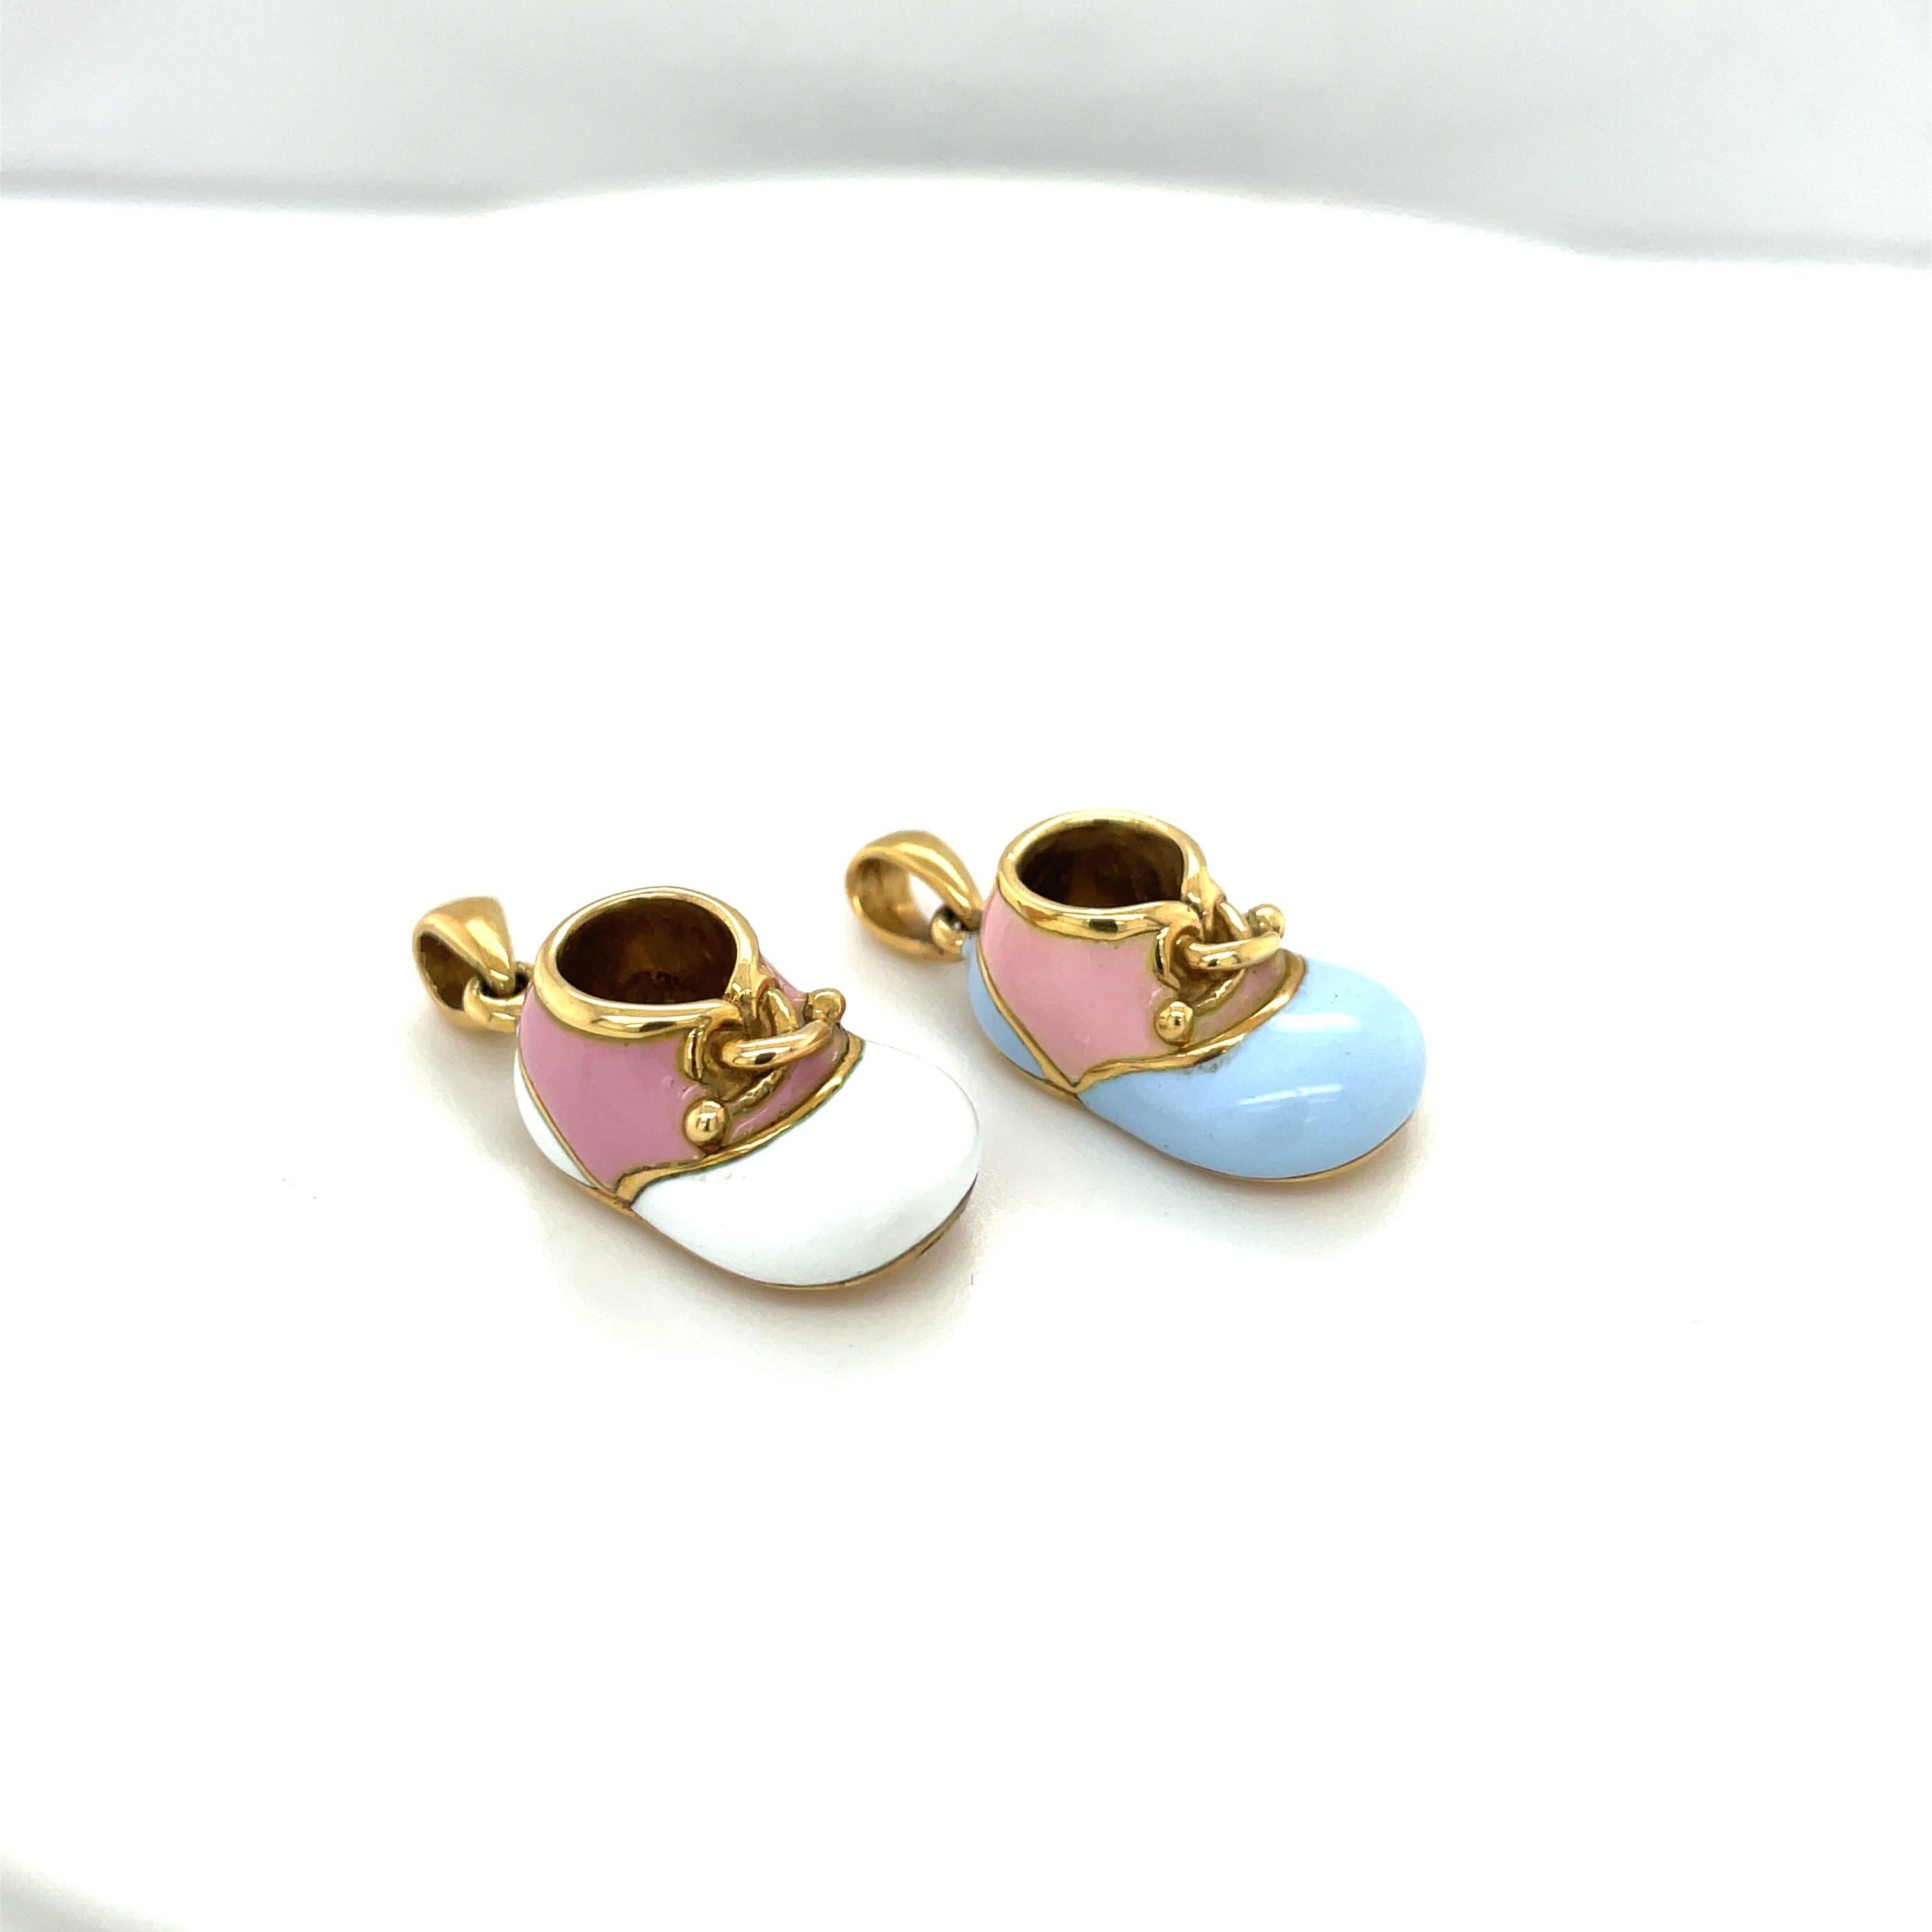 Modern 18Kt Yellow Gold Baby Shoe with Pink & White Enamel with Laces For Sale